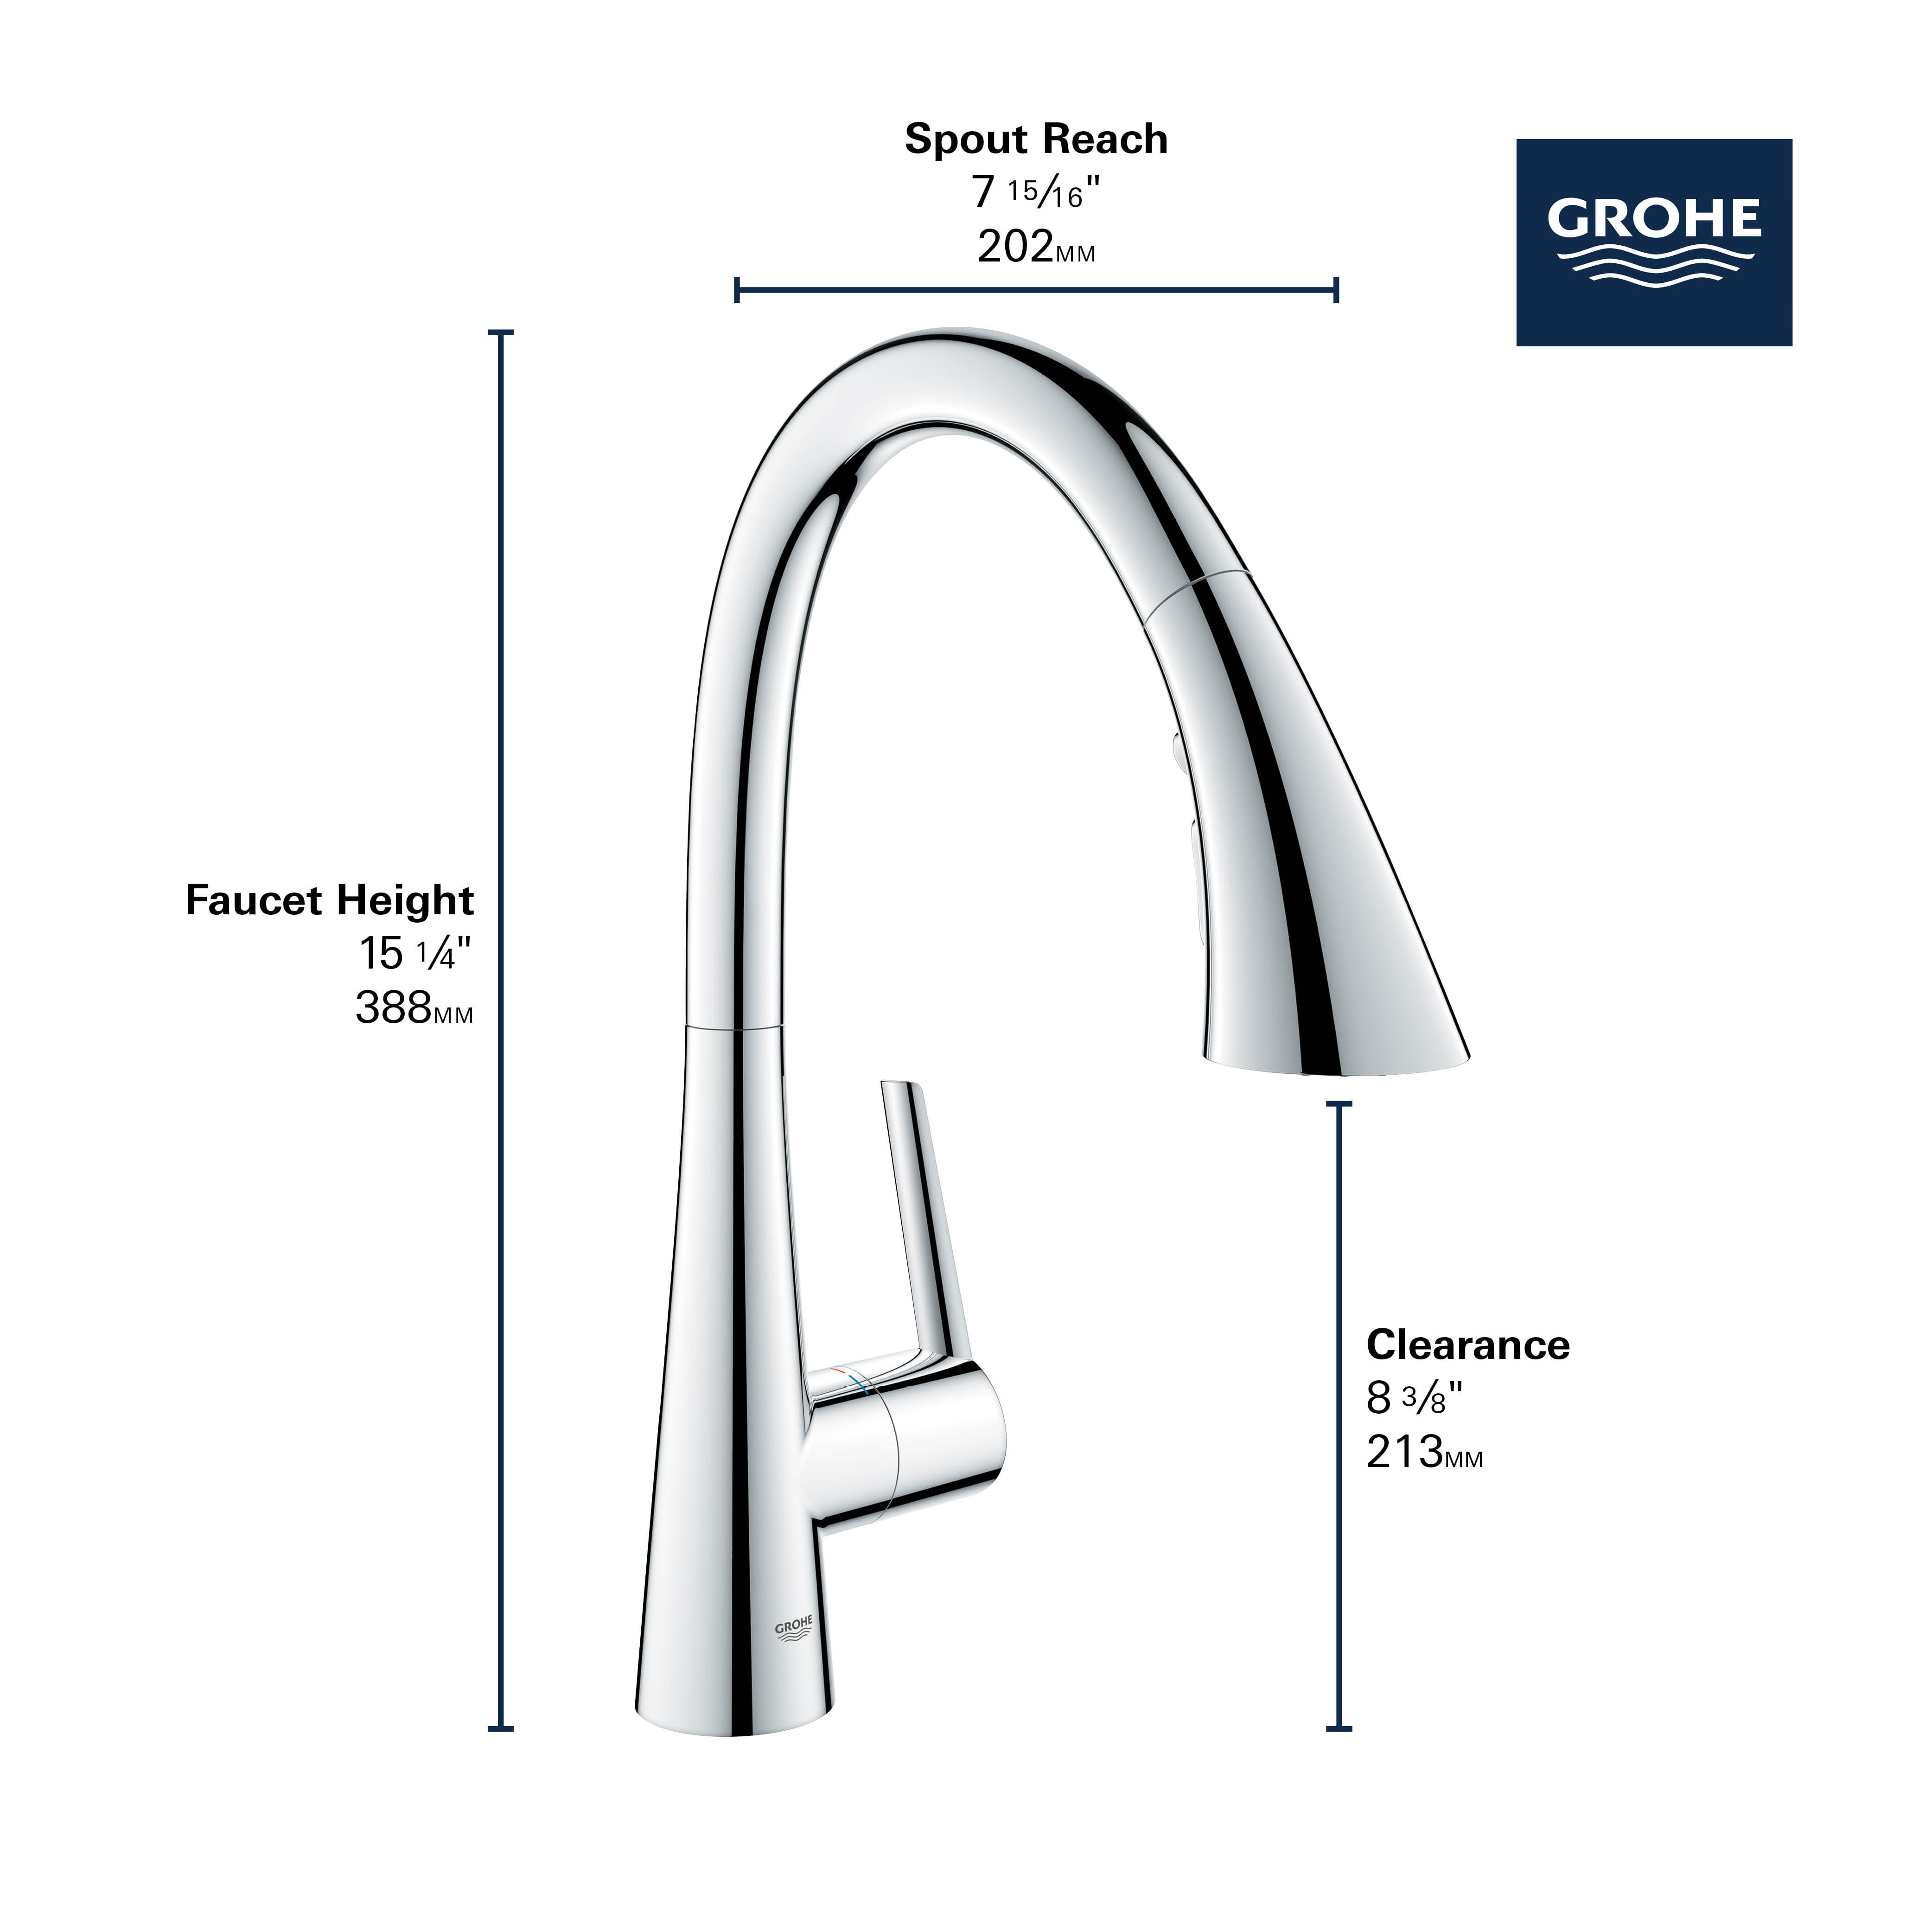 Single Handle Pull Down Triple Spray Bar Faucet  175 GPM GROHE SUPERSTEEL